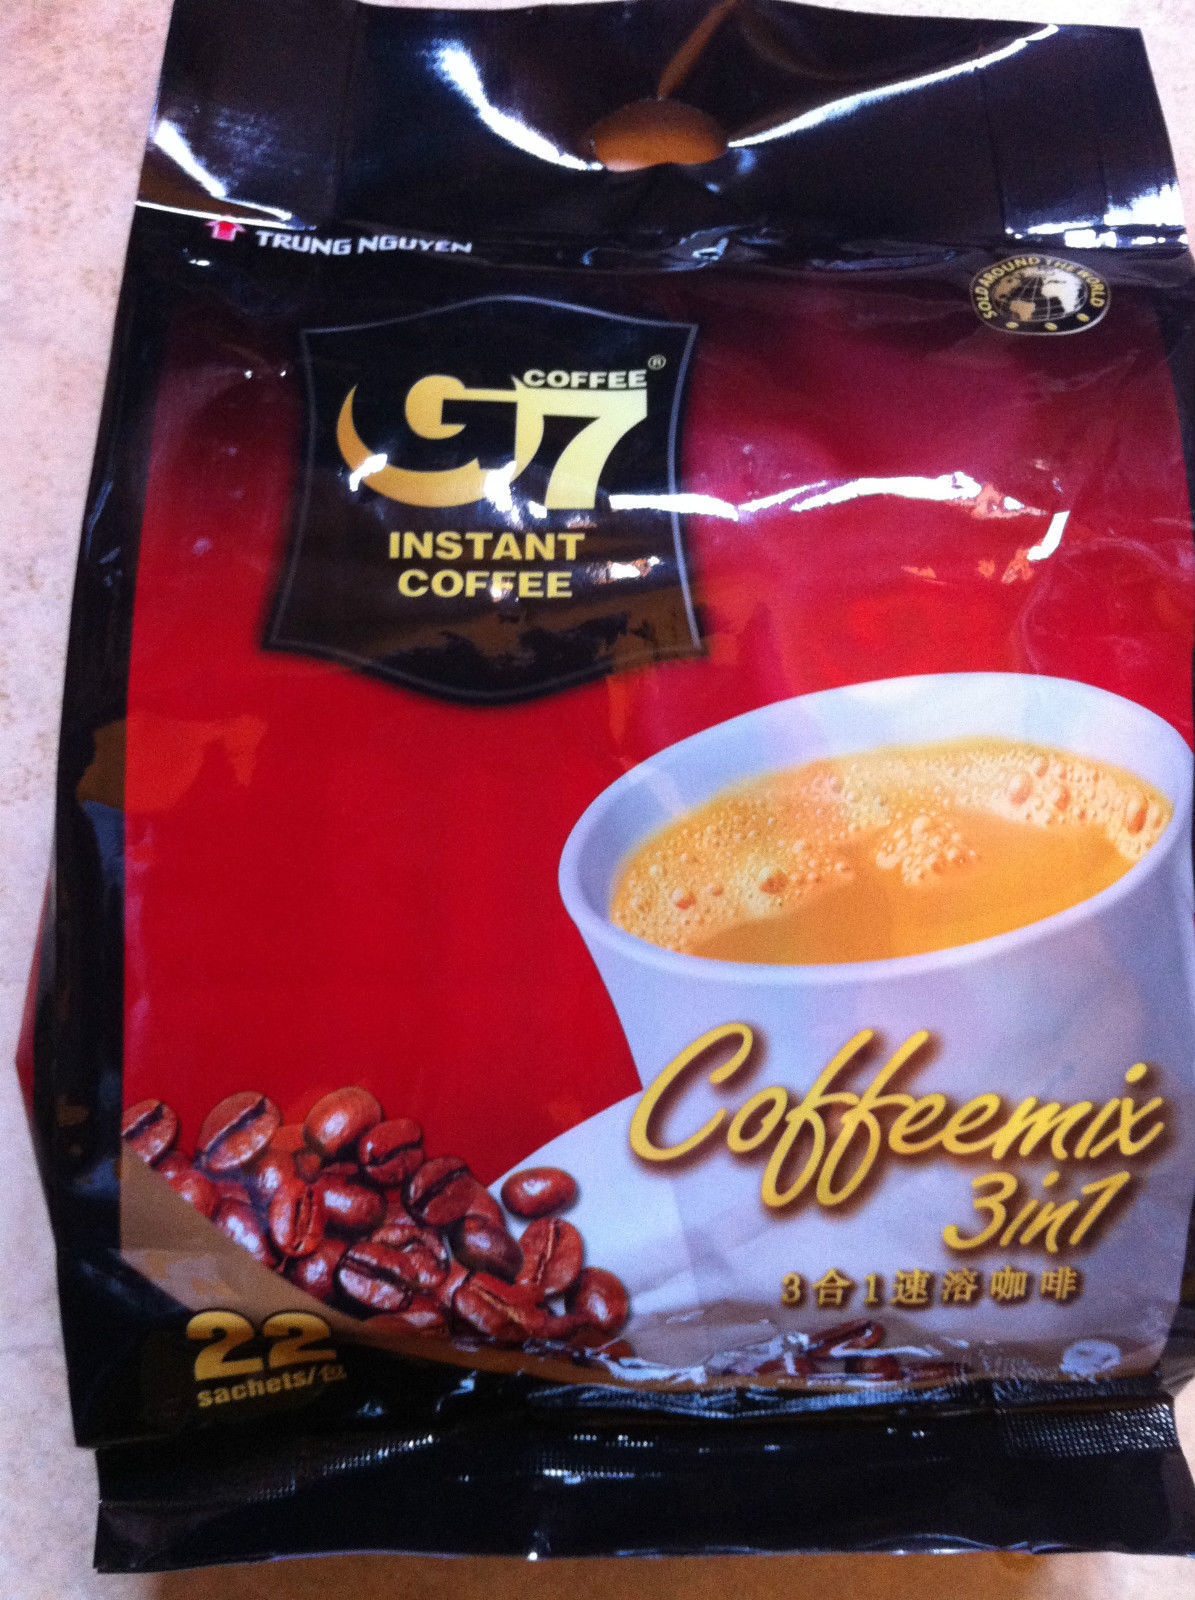 TRUNG NGUYEN, G7, 3-in1, Regular Instant, Coffee, Mix 20 Packets ( New ) - $6.78